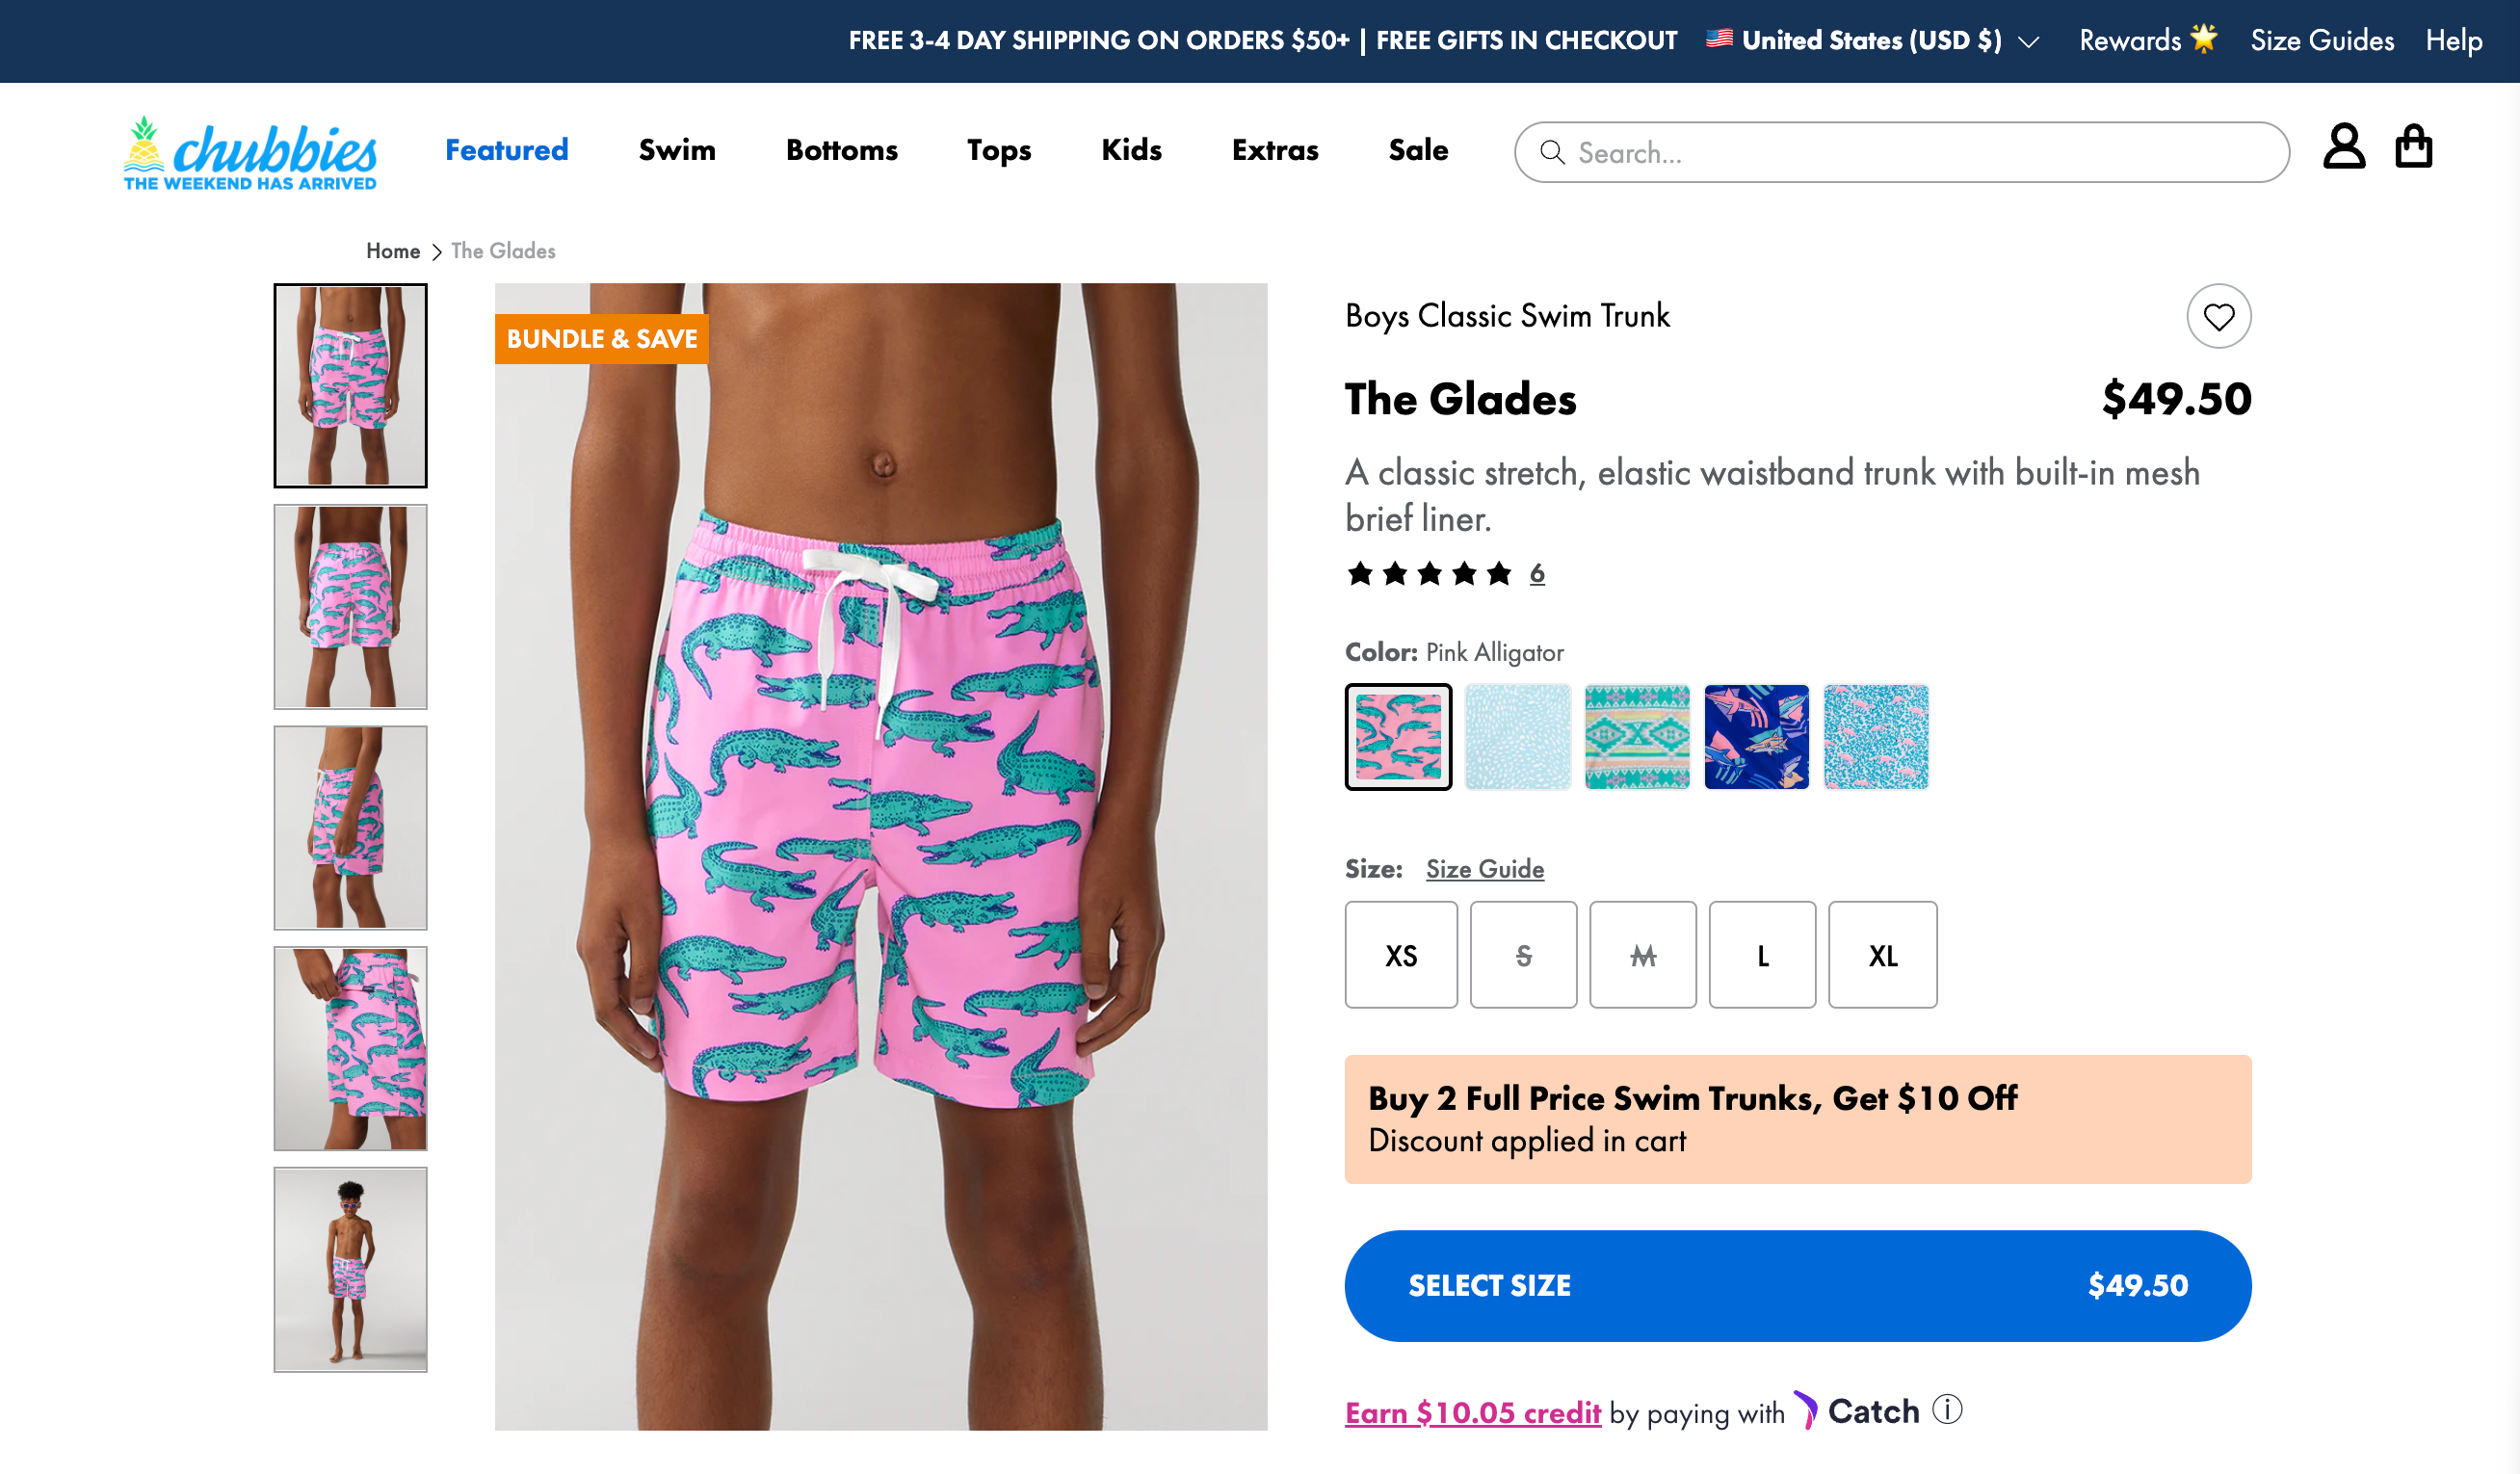 Screen grab of product page on the Chubbies ecommerce website